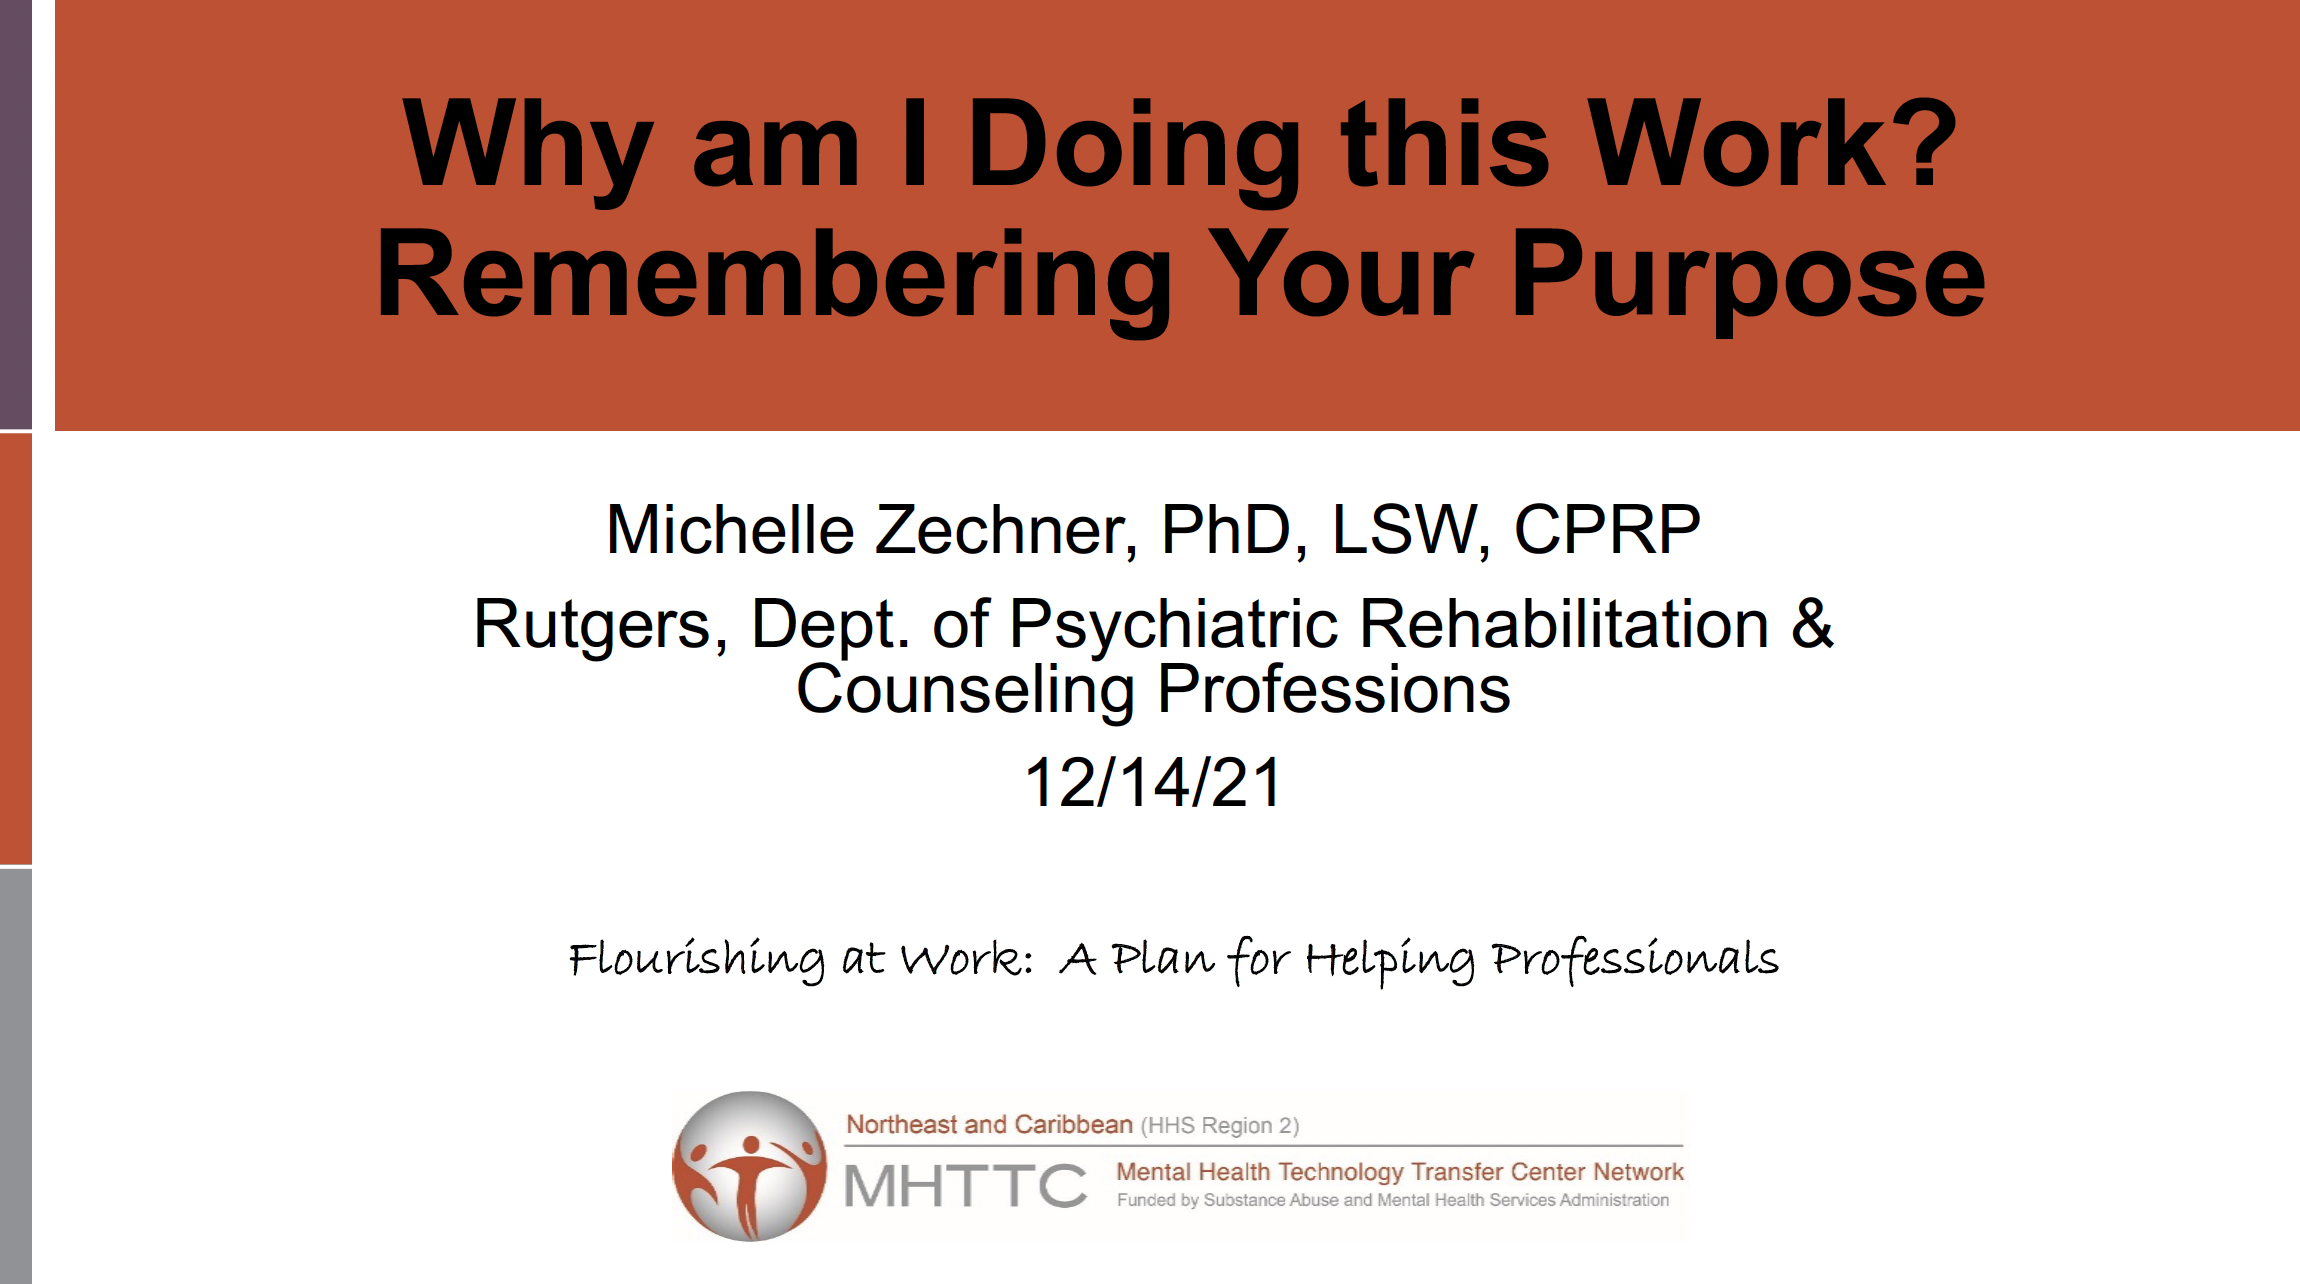 Flourishing at Work: A Plan for Helping Professionals | Session 2: Why am I Doing this Work? Remembering Your Purpose